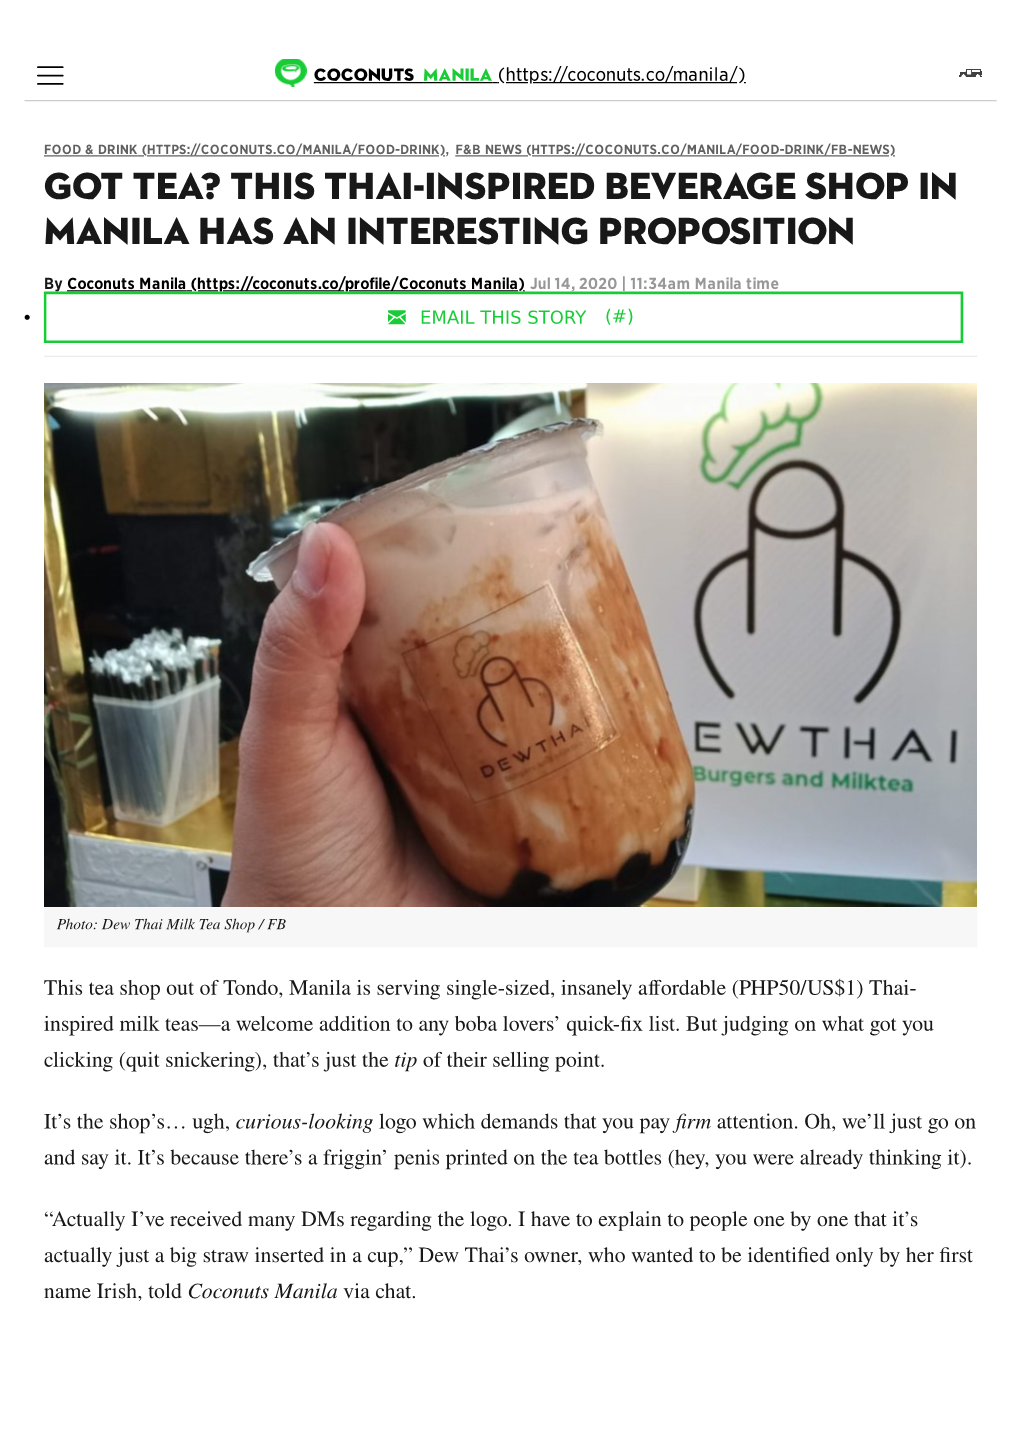 This Thai-Inspired Beverage Shop in Manila Has an Interesting Proposition